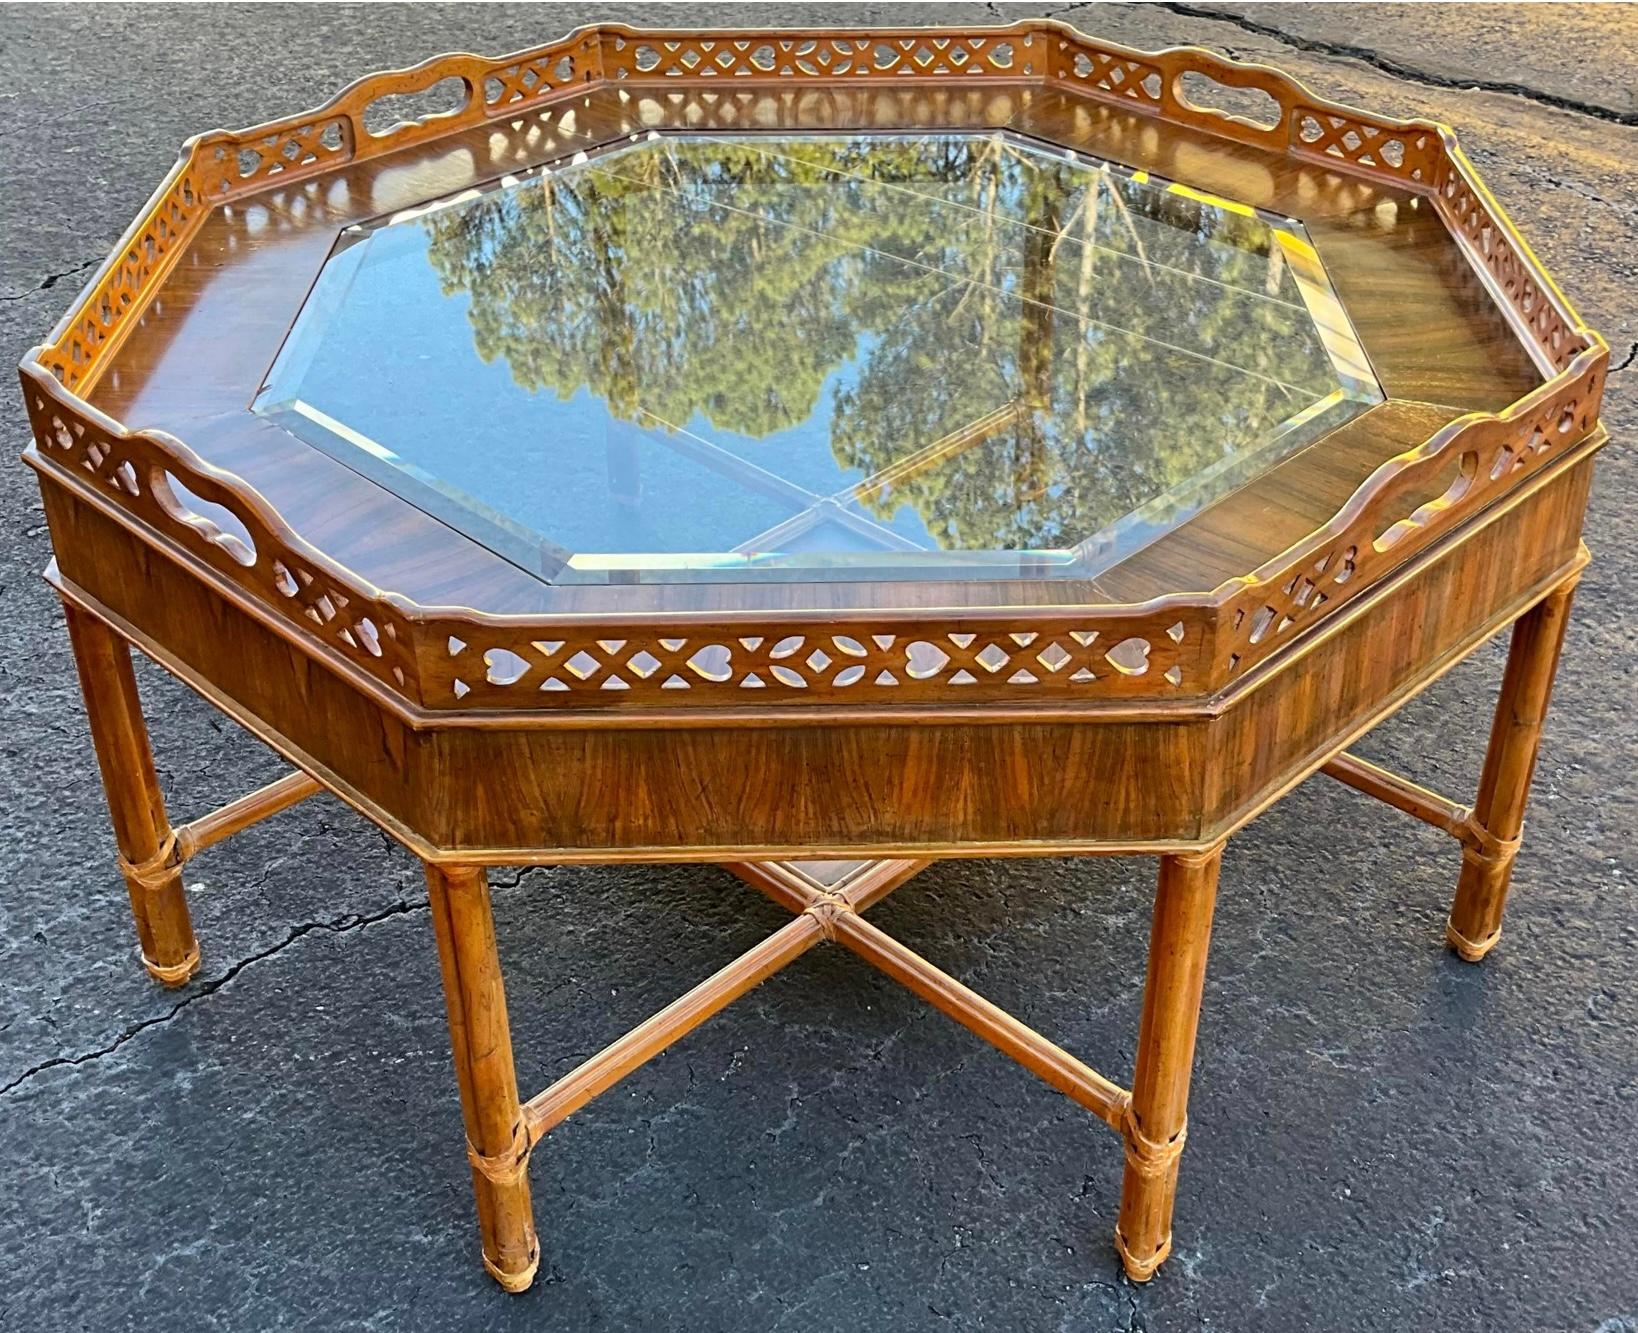 Philippine Maitland-Smith Chippendale Style Coffee Table With Fretwork And Rattan Base  For Sale